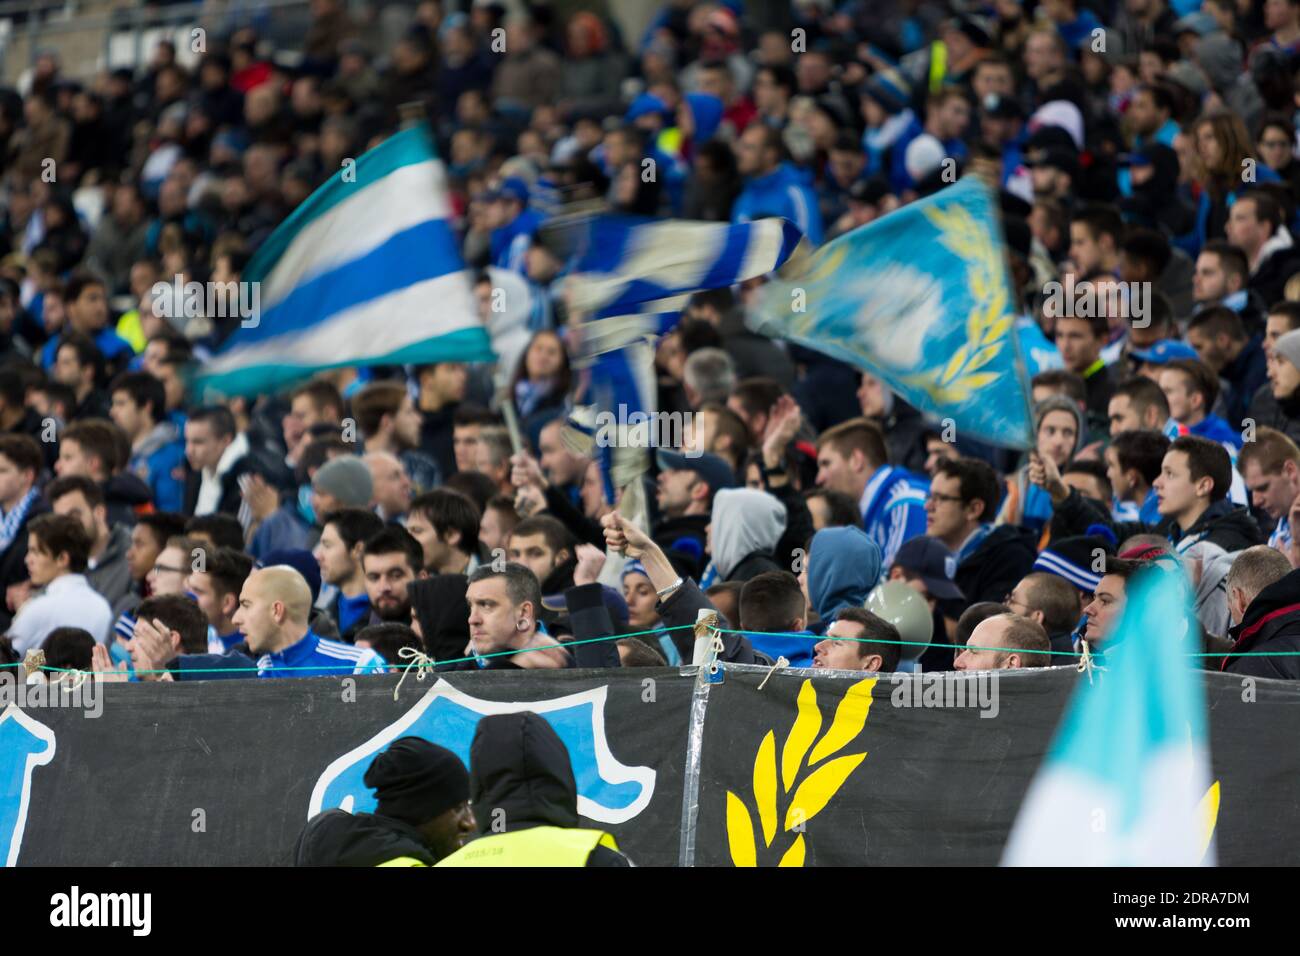 Marseille's fans during the UEFA Europa League Group F soccer match, Olympique de Marseille Vs FC Groningen at Stade Vélodrome in Marseille, France on November 27th, 2015. Photo by Guillaume Chagnard/ABACAPRESS.COM Stock Photo